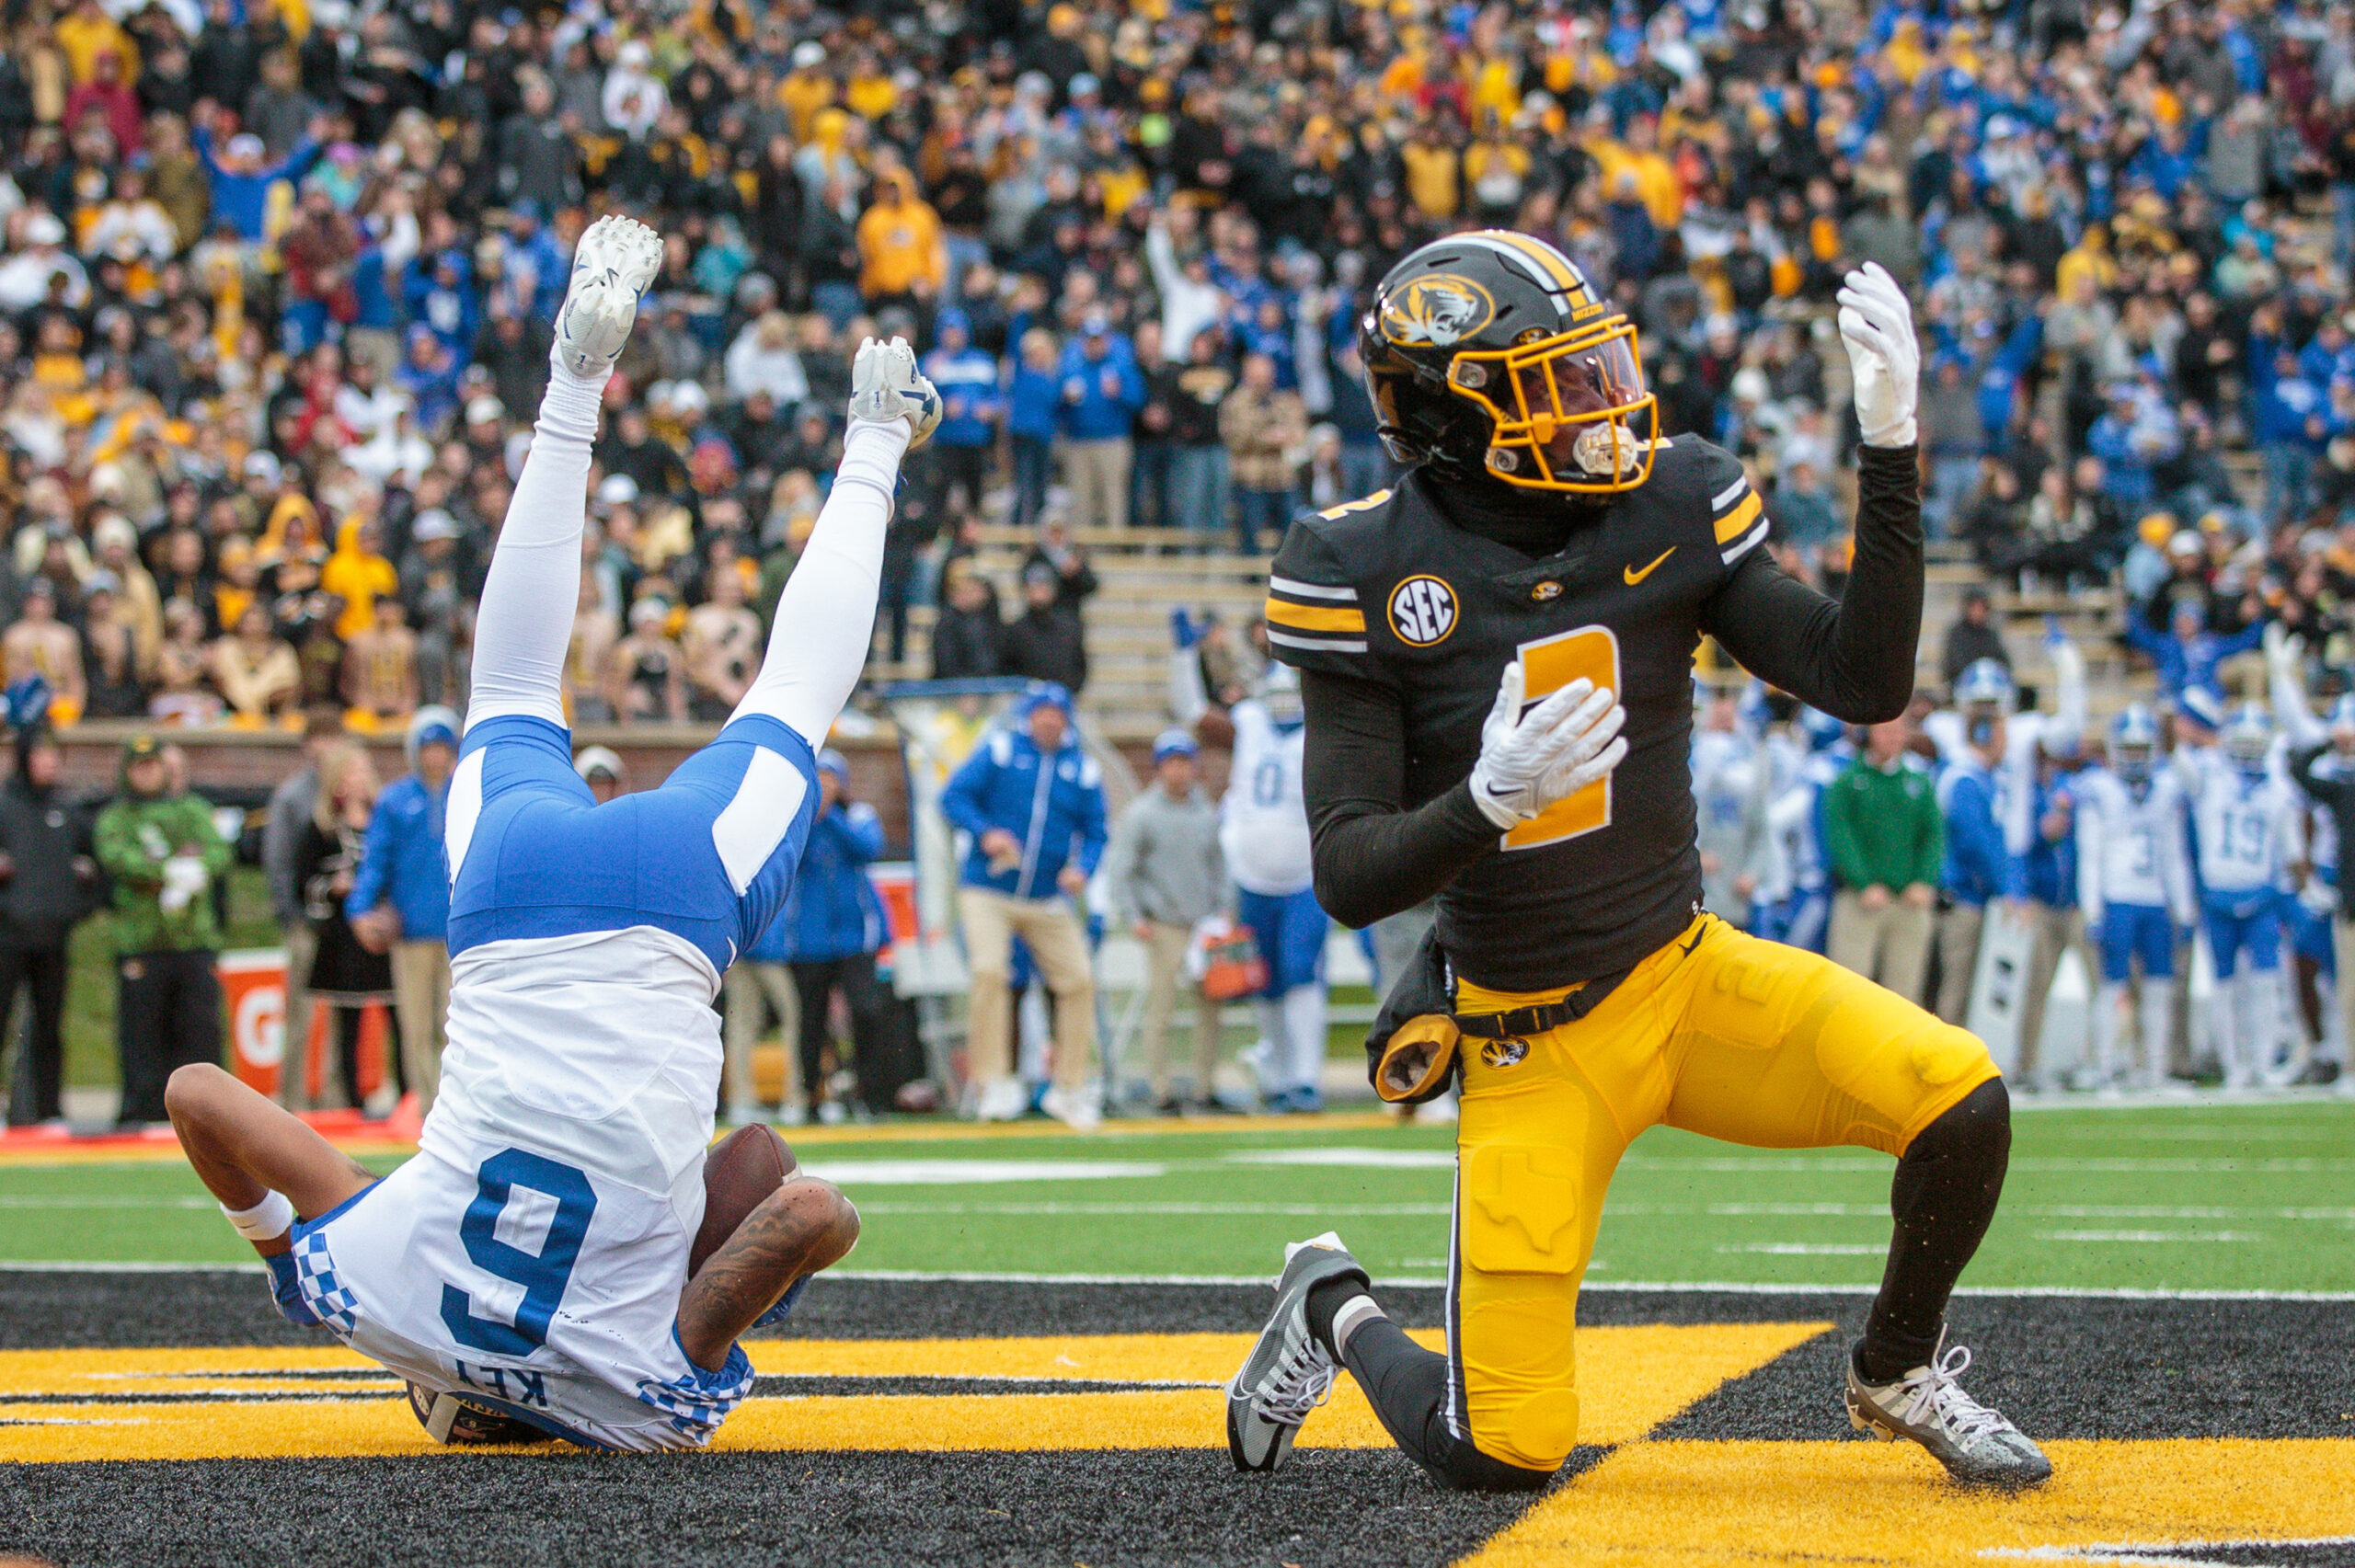 Ennis Rakestraw Jr kneels in the endzone while a Kentucky receiver lands on his head.